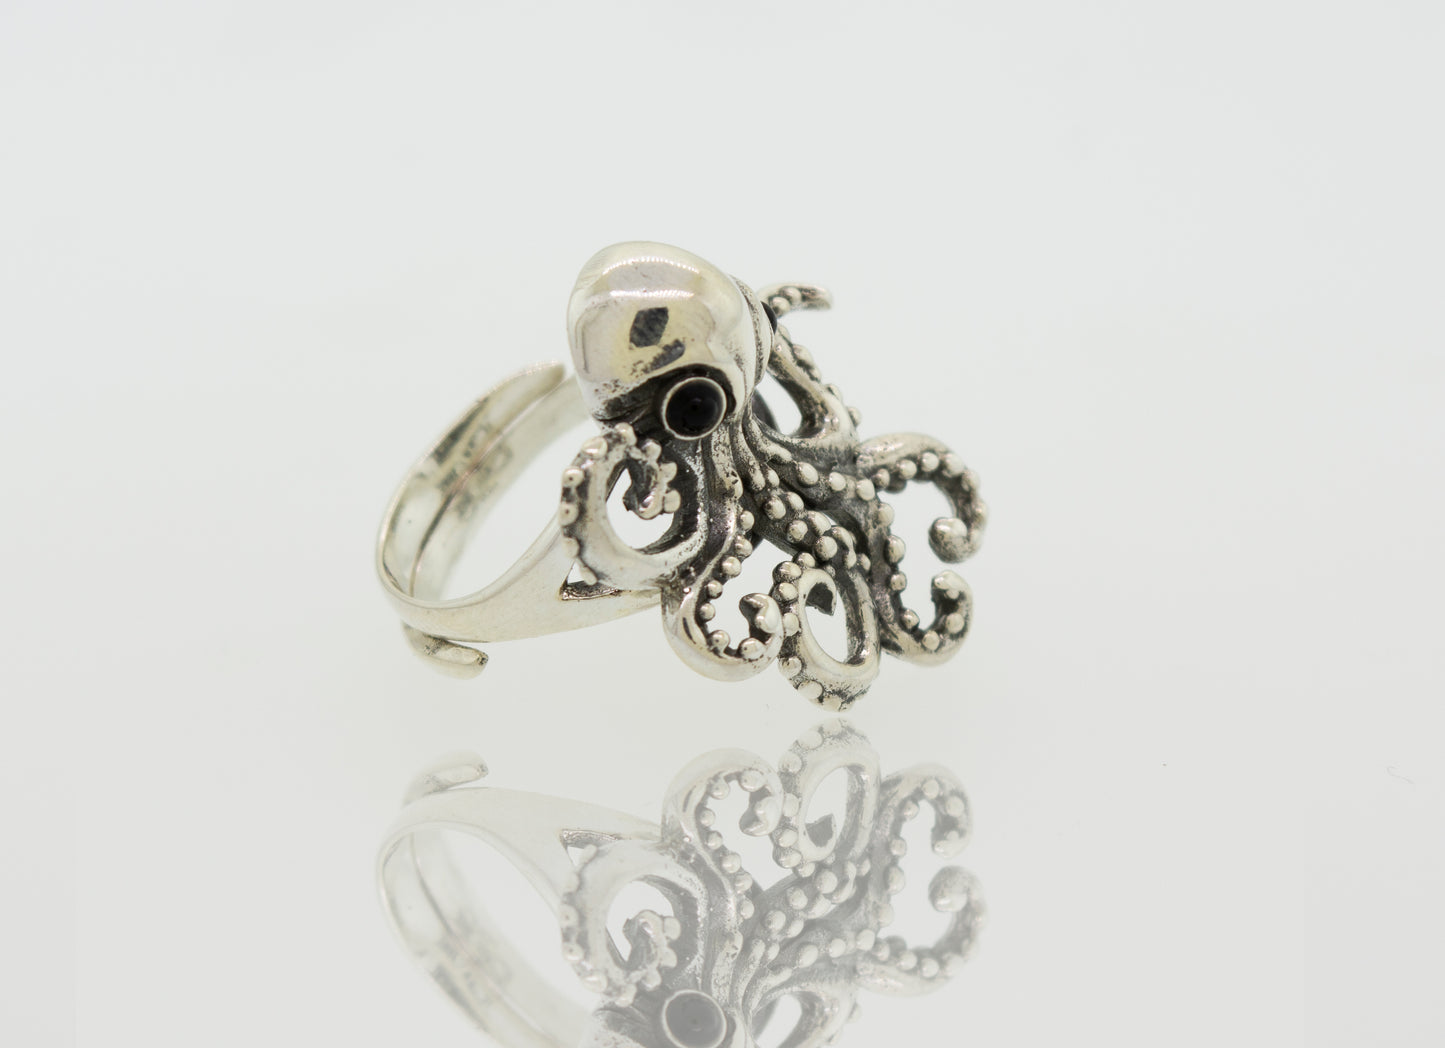 A designer Octopus Adjustable Ring with sterling silver tentacles on a white background.